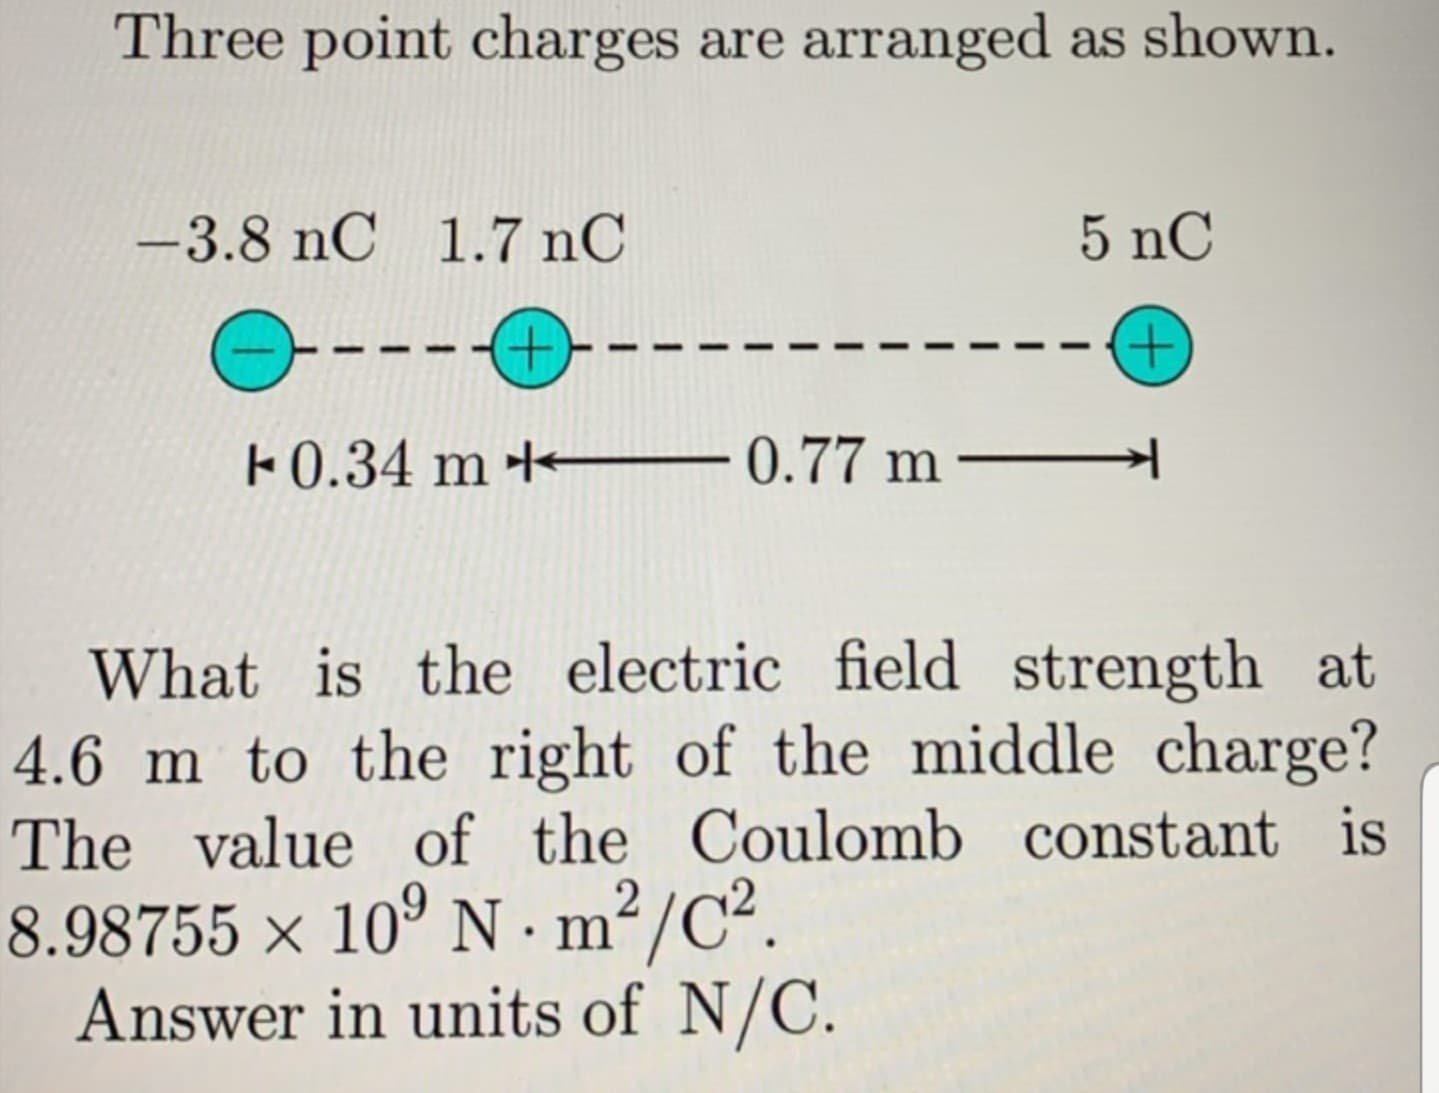 Three point charges are arranged as shown.
-3.8 nC 1.7 nC
5 nC
---+--
+,
F0.34 m + 0.77 m –
What is the electric field strength at
4.6 m to the right of the middle charge?
The value of the Coulomb constant is
8.98755 × 10° N ·m²/C².
Answer in units of N/C.
